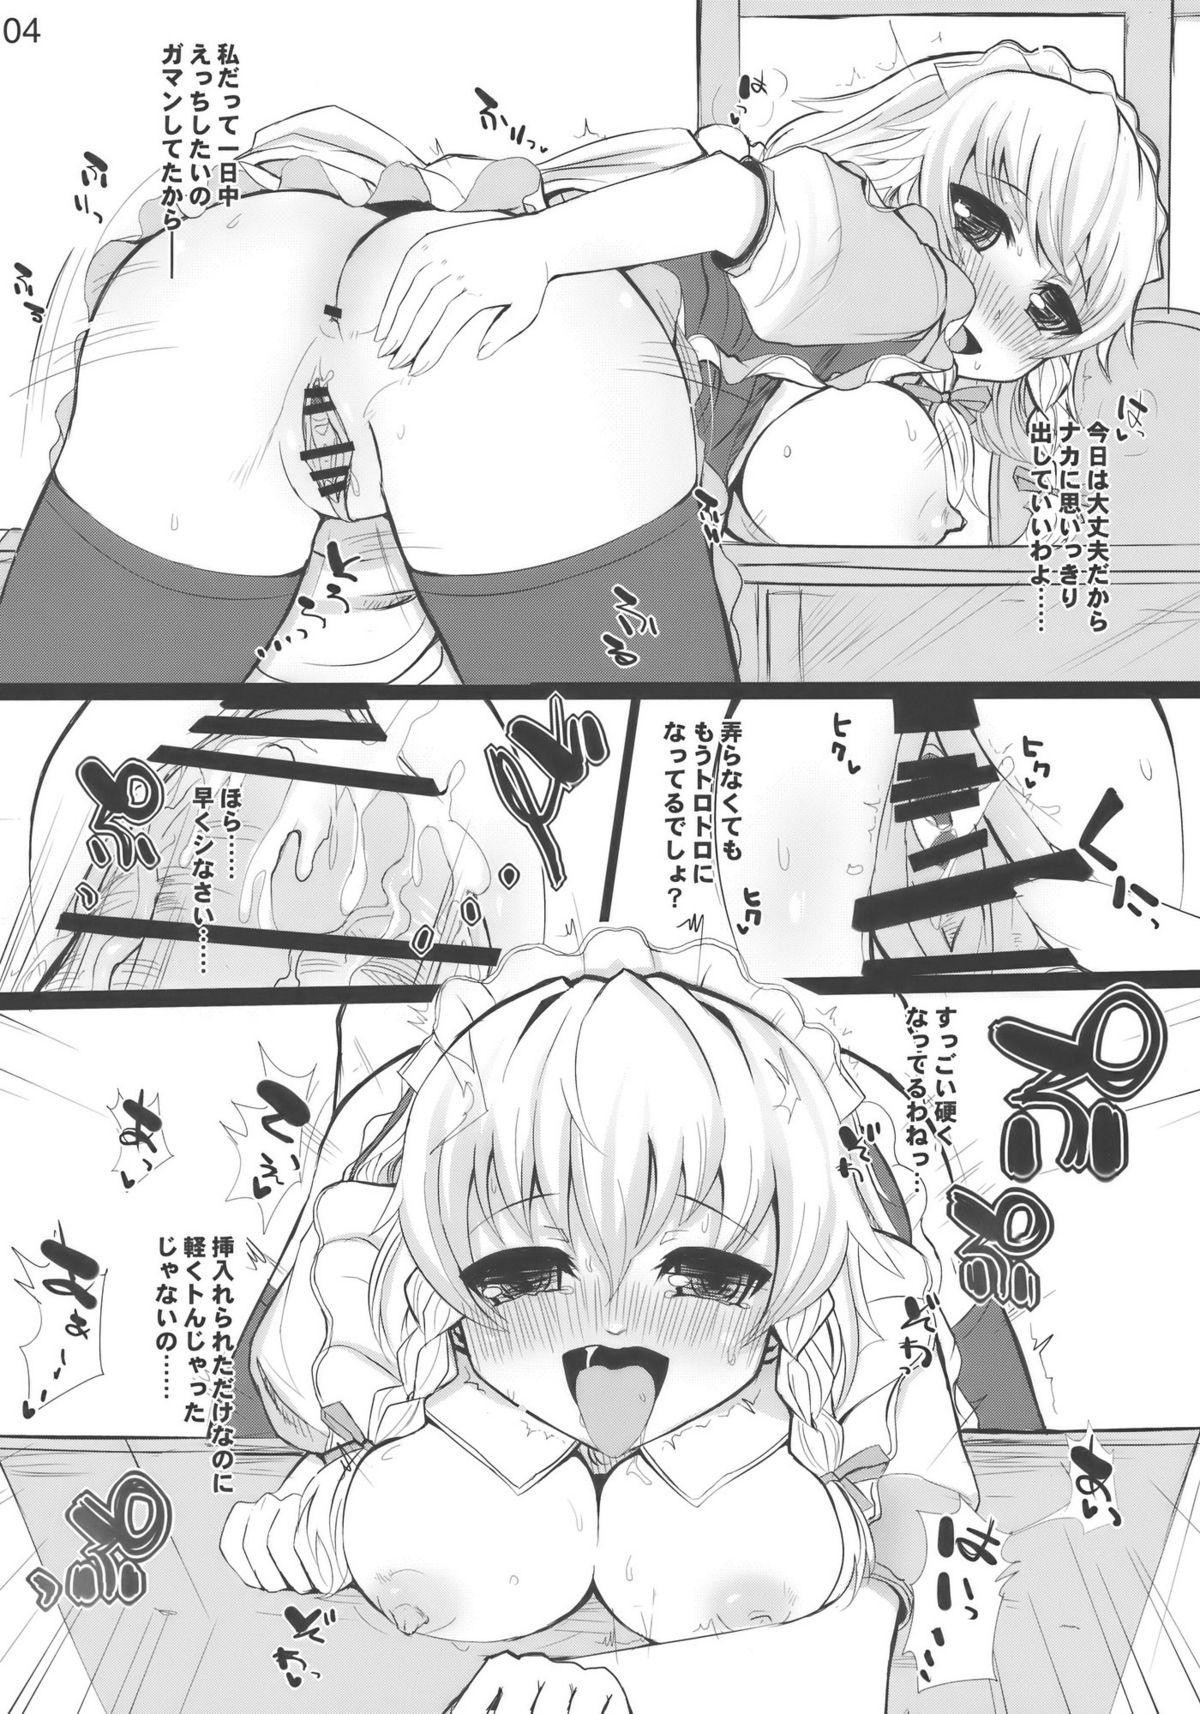 Money Talks Feed me with your Kiss - Touhou project Housewife - Page 4